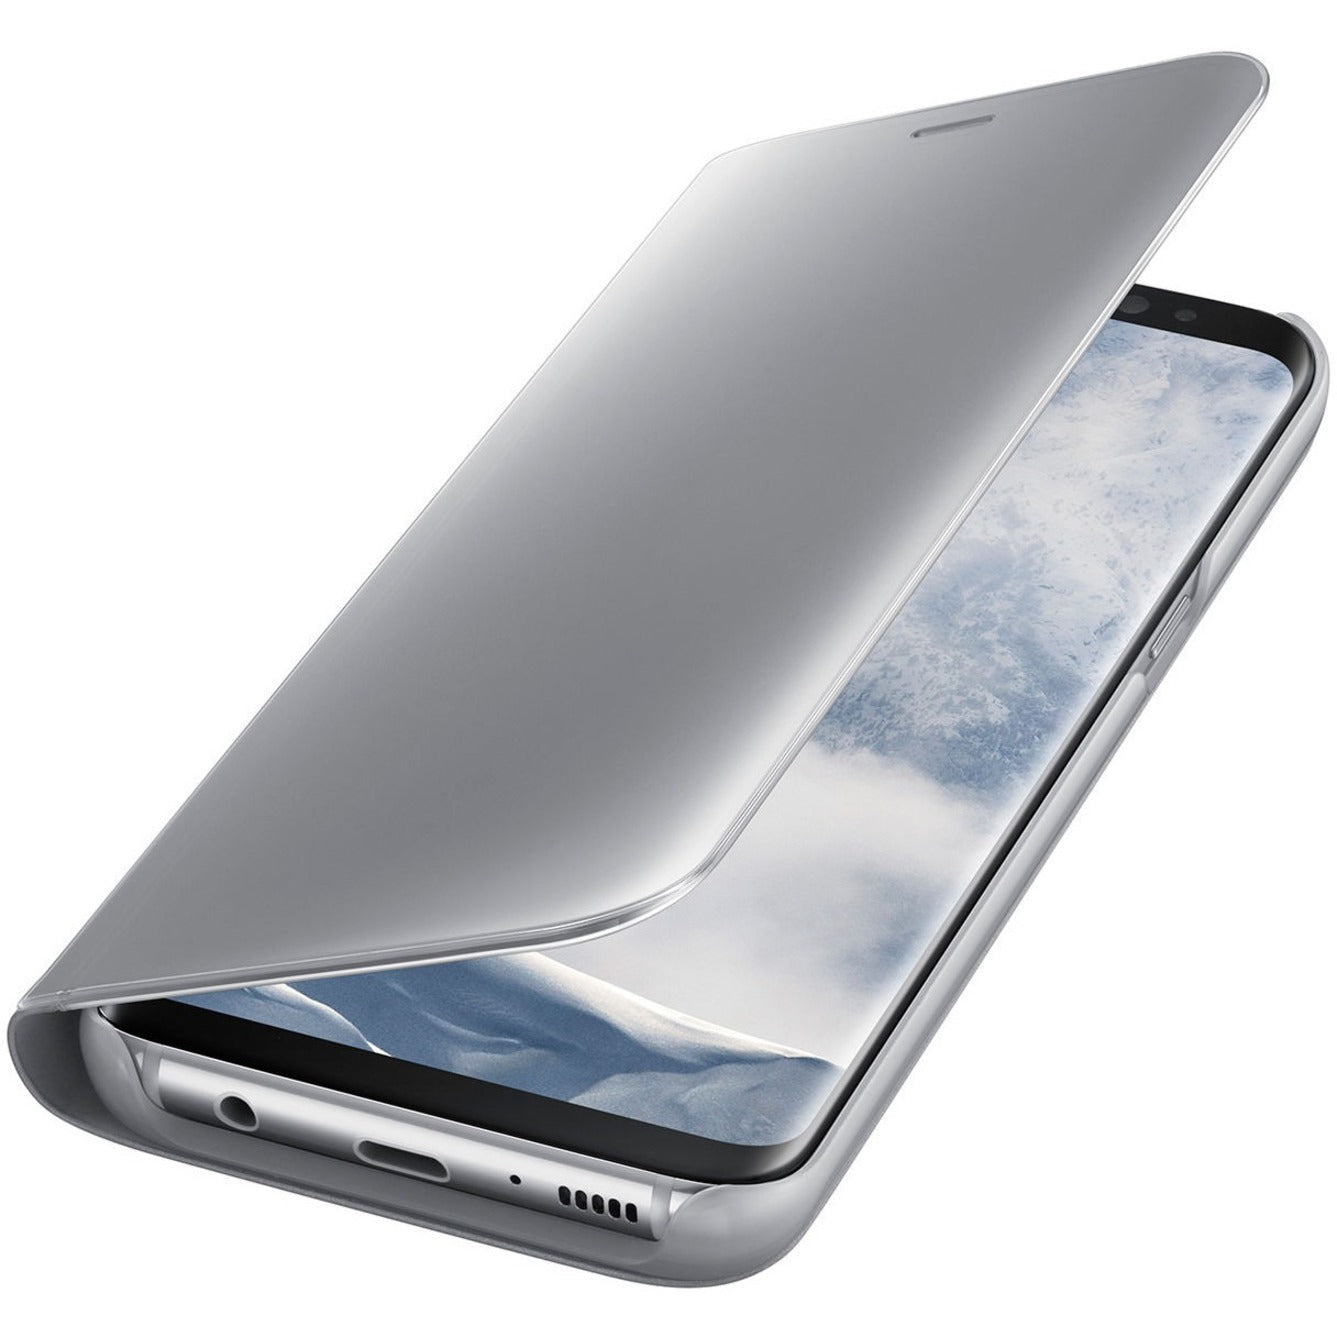 Samsung S-View Carrying Case (Folio) Smartphone - Silver